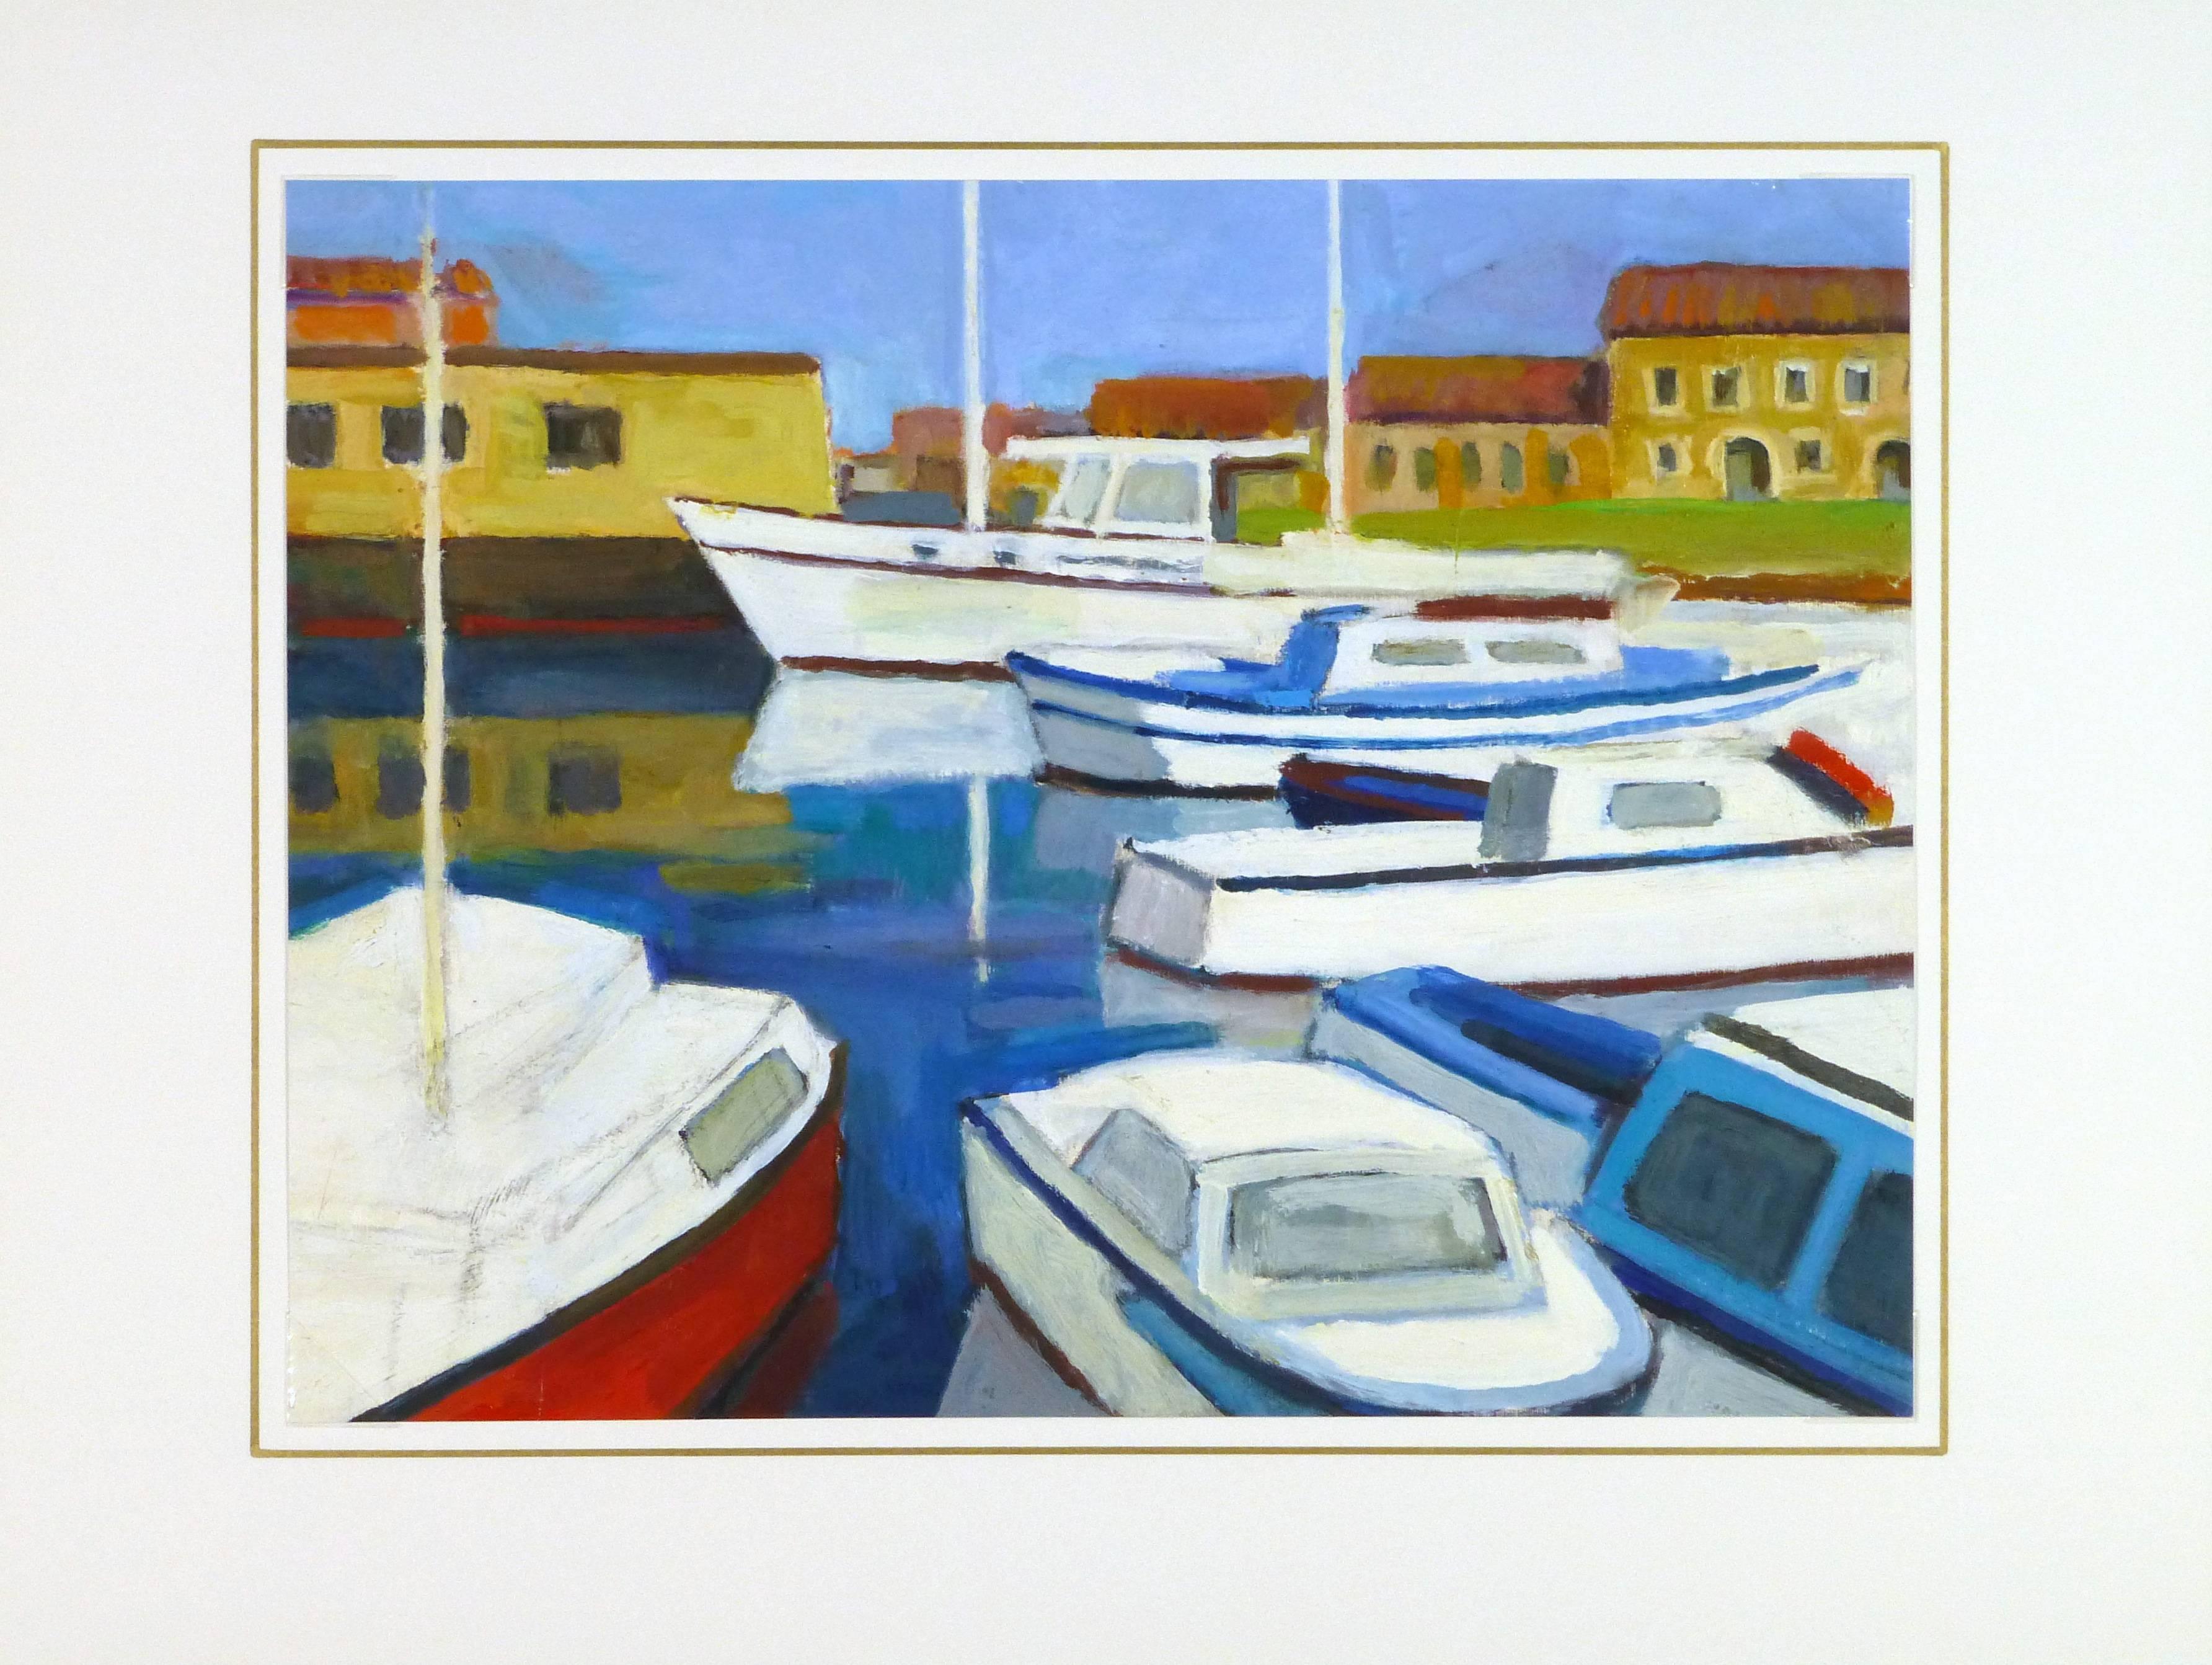 Soothing French painting of a peaceful scene of boats docked at a small marina, circa 1950. 

Original one-of-a-kind vintage work of art on paper displayed on a white mat with a gold border. Mat fits a standard-size frame. Archival plastic sleeve